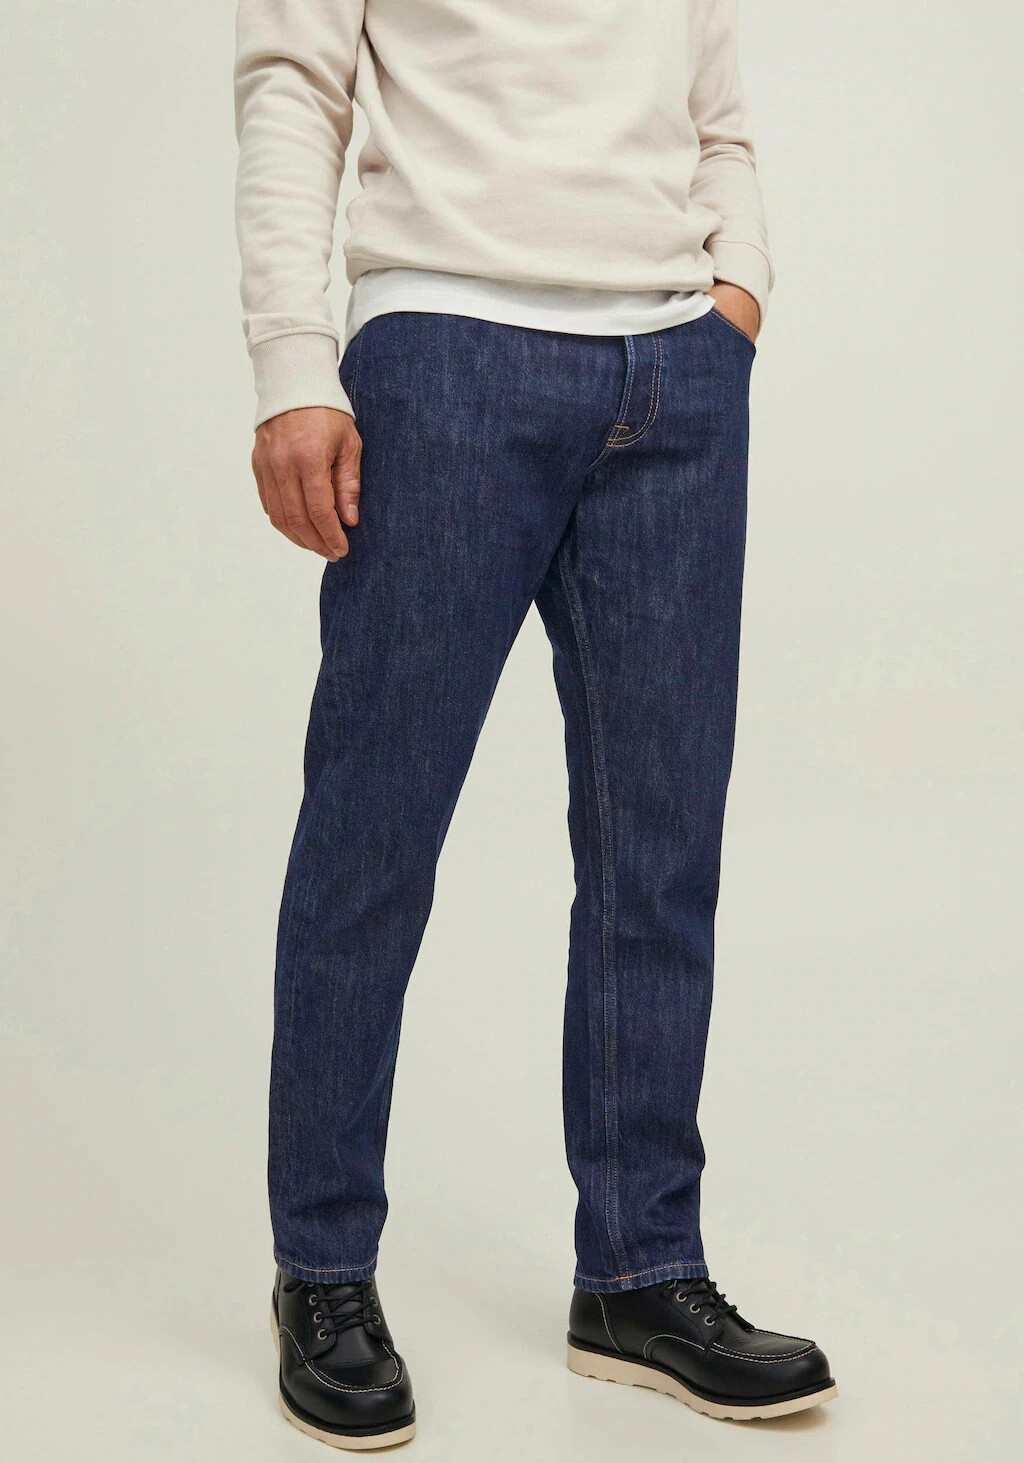 Jack Wills Bootcut Jeans  SportsDirect.com Lithuania